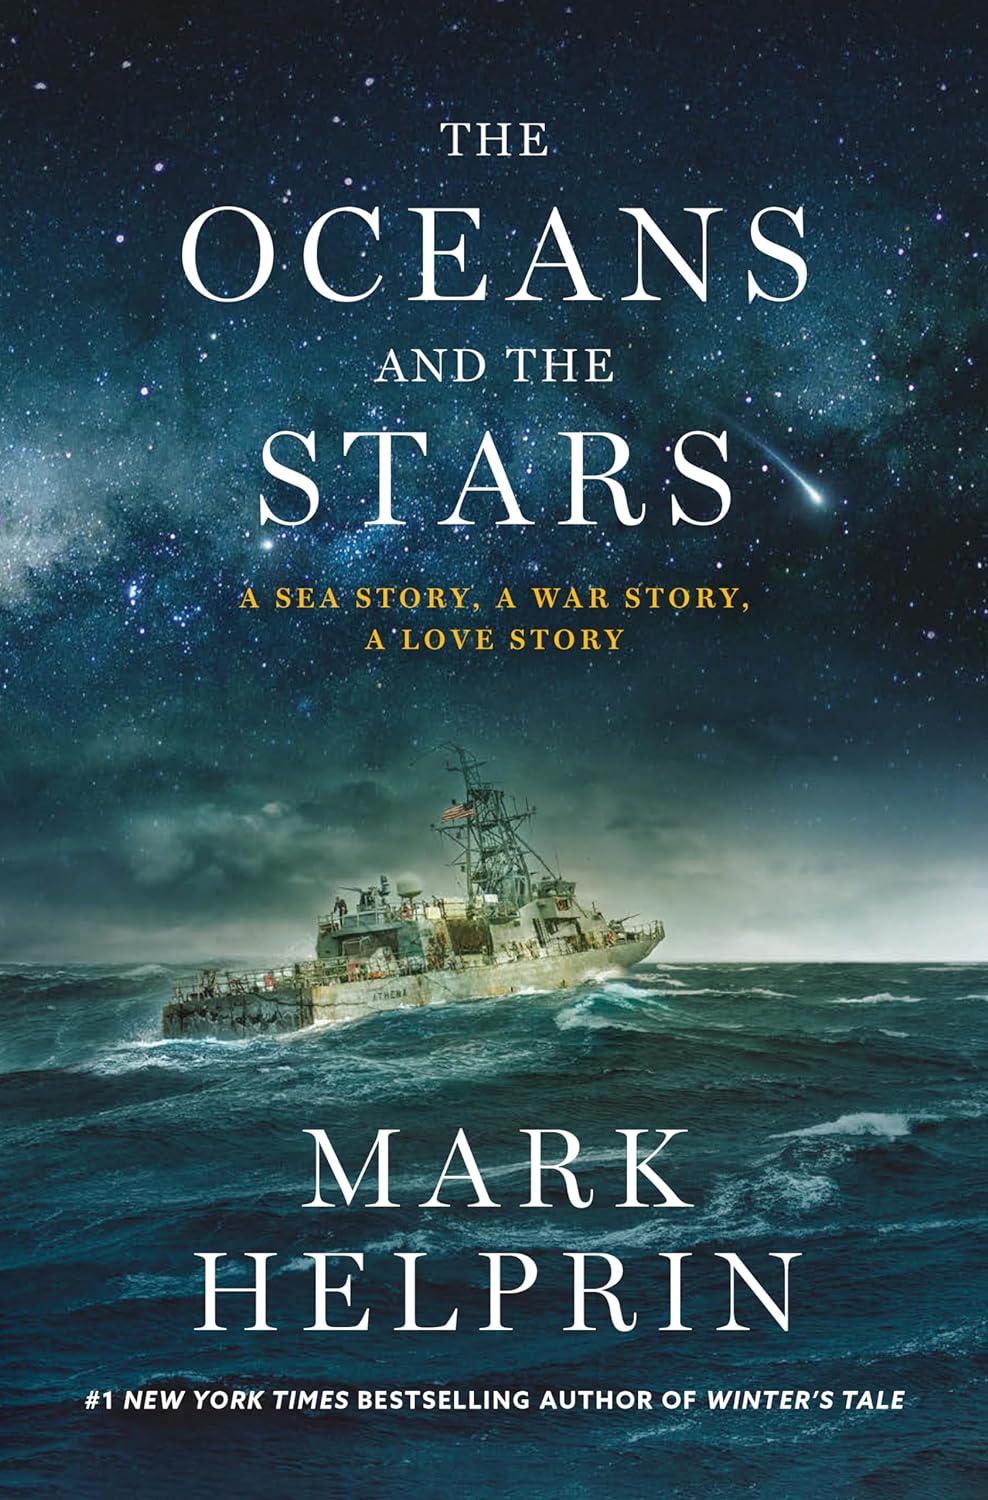 "The Oceans and the Stars: A Sea Story, A War Story, A Love Story" by Mark Helprin.